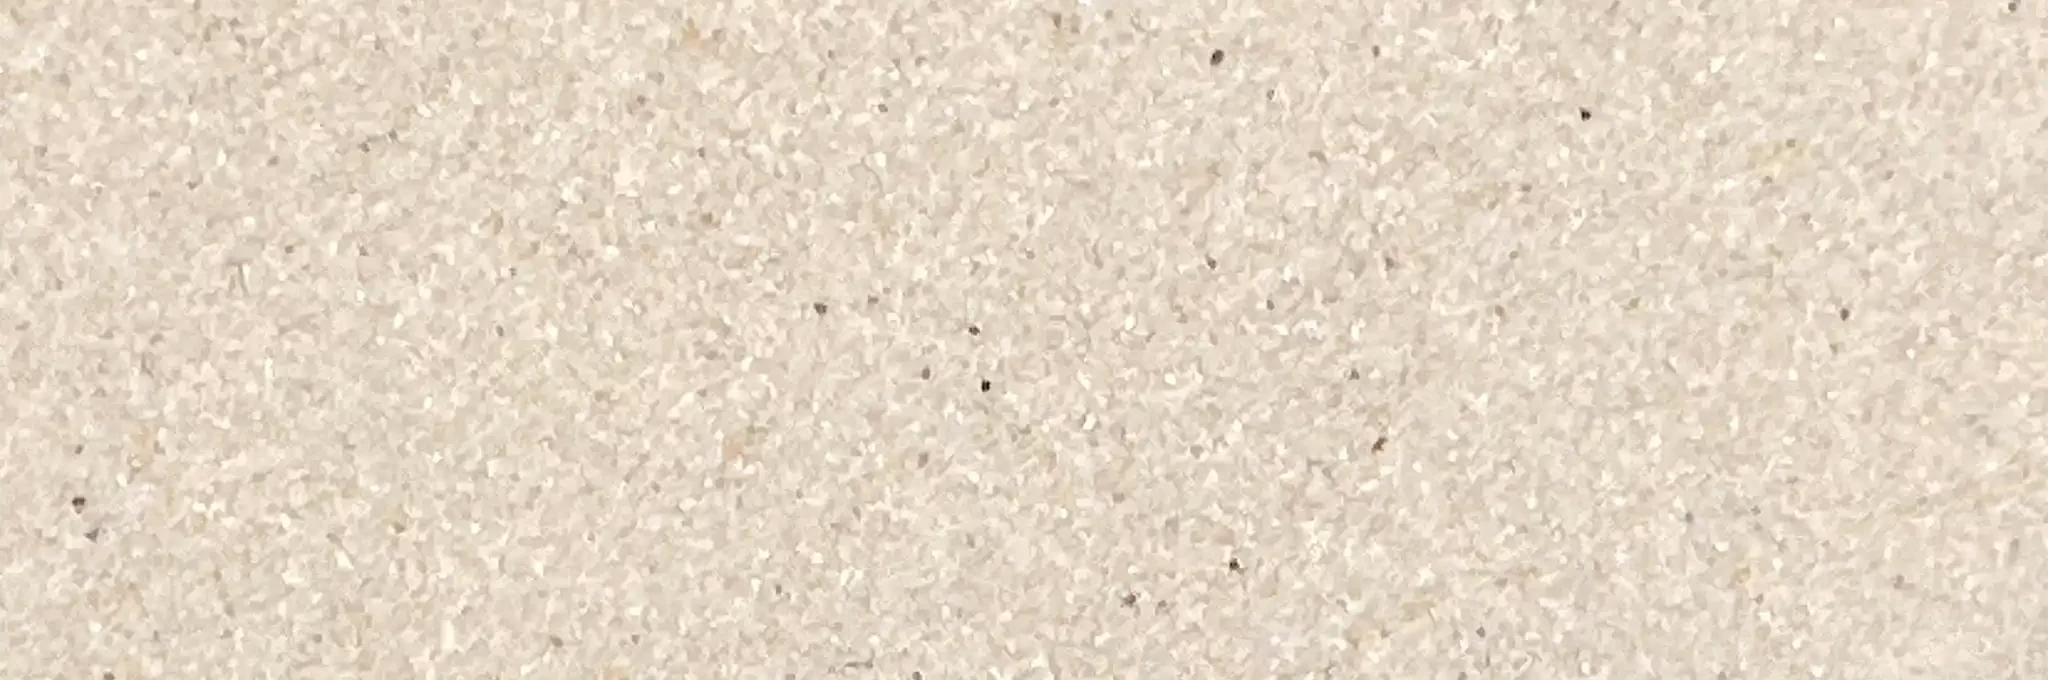 A close-up view of Kiln Dried Sand.